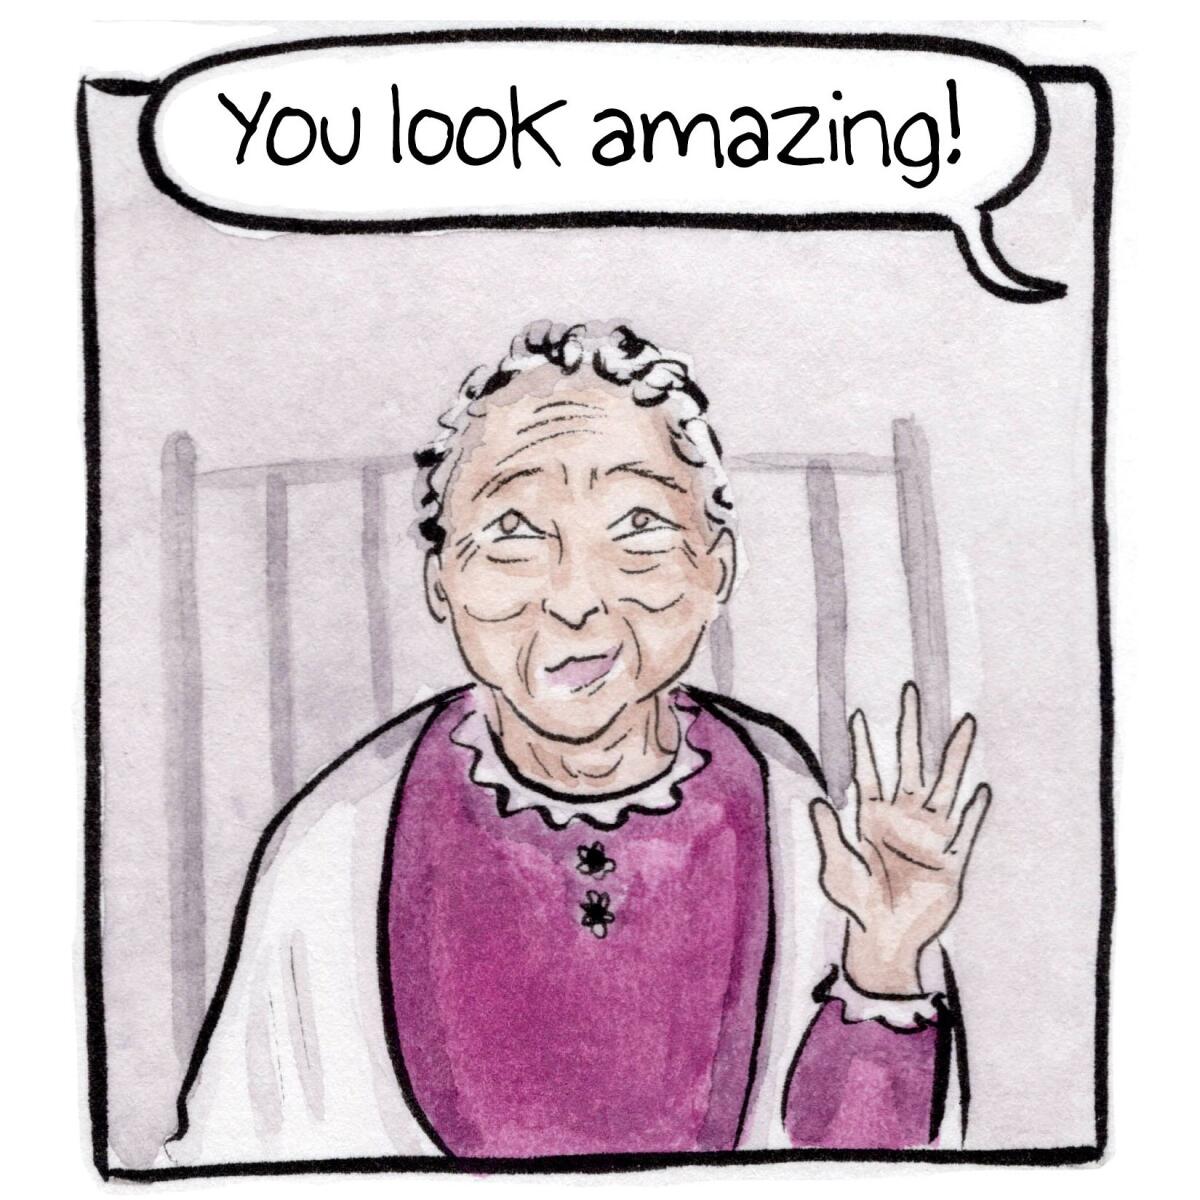 Someone says, "You look amazing!" to an elderly woman in a pink nightgown, waving as she sits in bed.